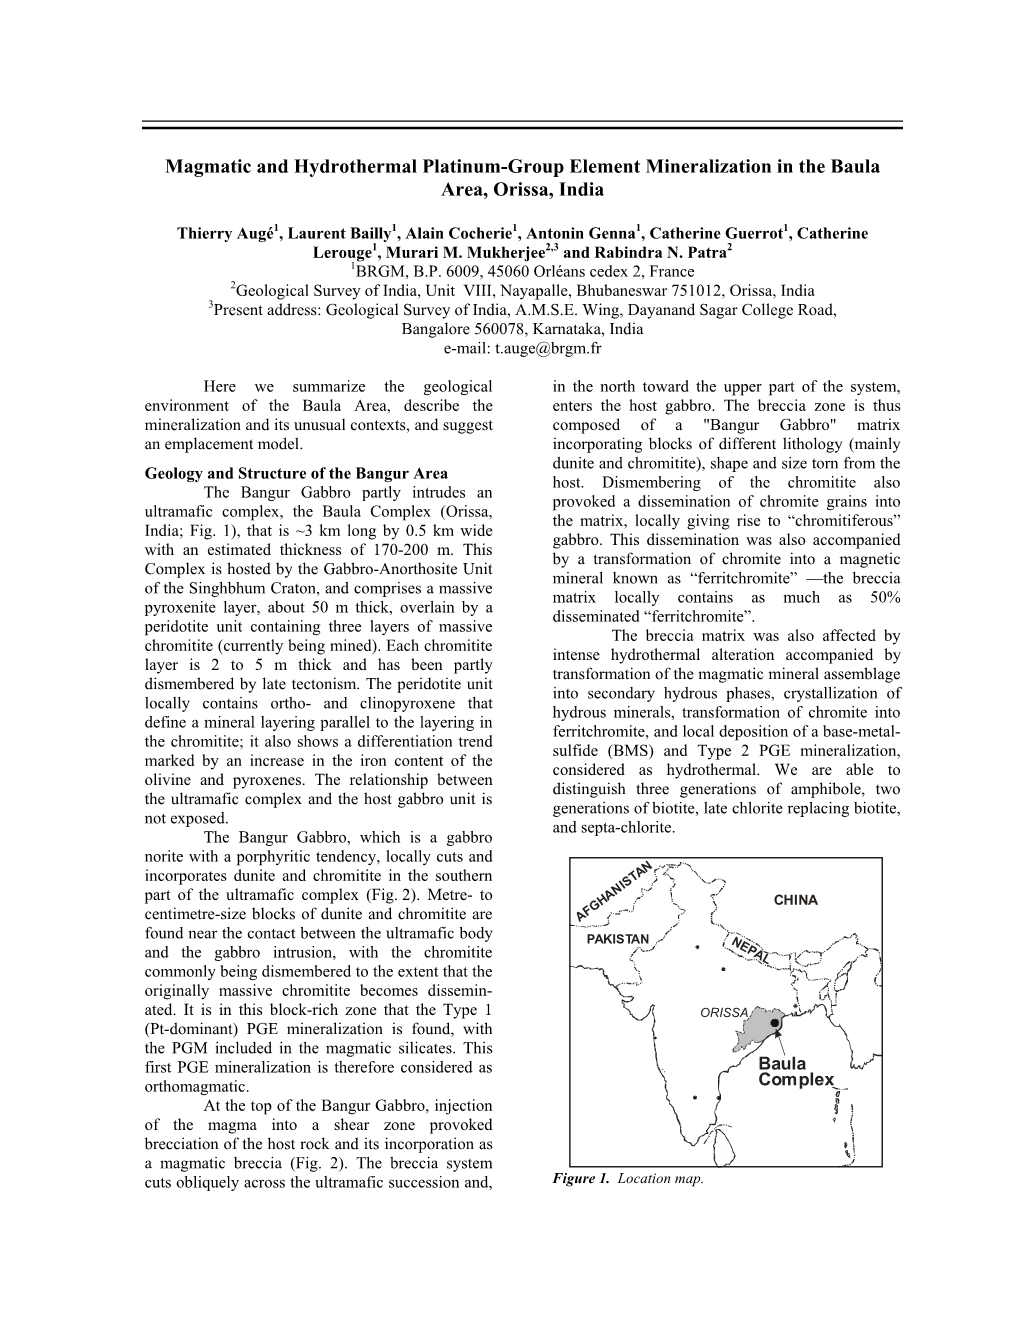 Magmatic and Hydrothermal Platinum-Group Element Mineralization in the Baula Area, Orissa, India